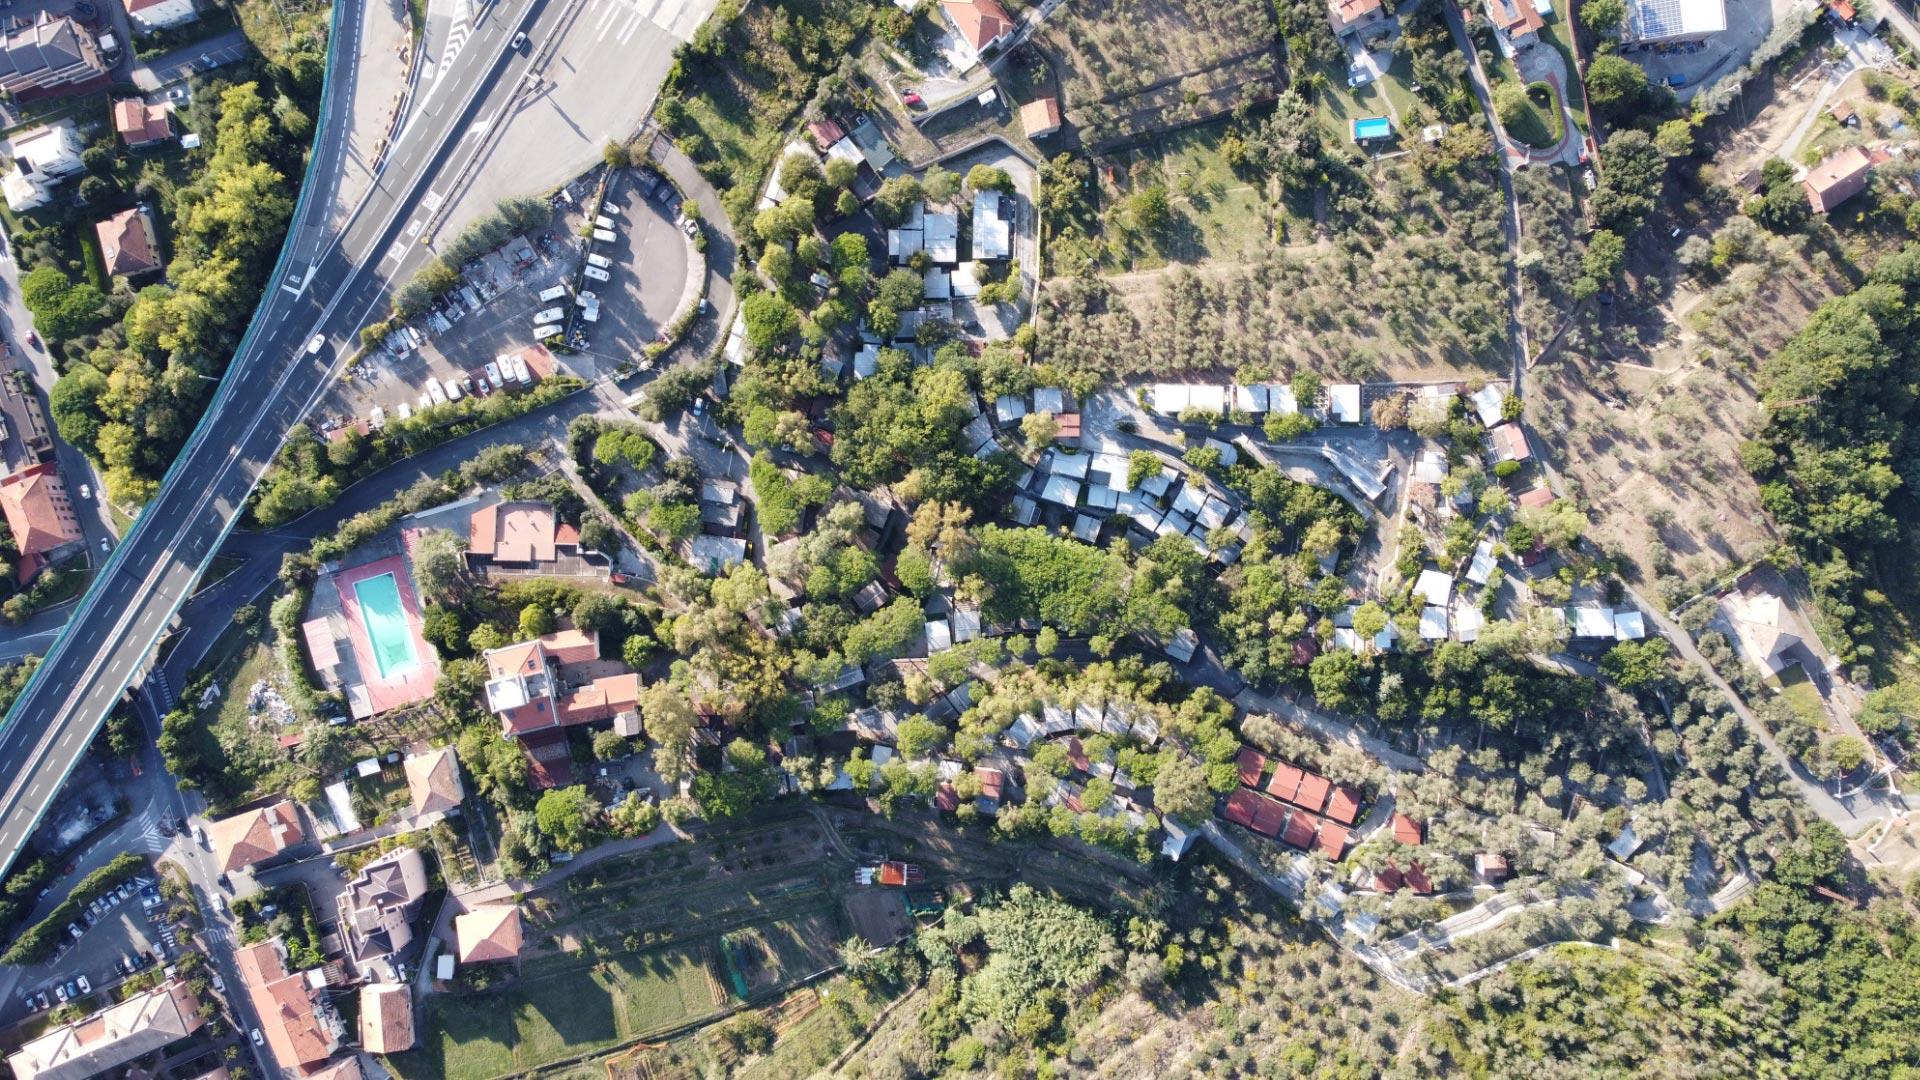 Aerial view of a residential area with pool and roads.